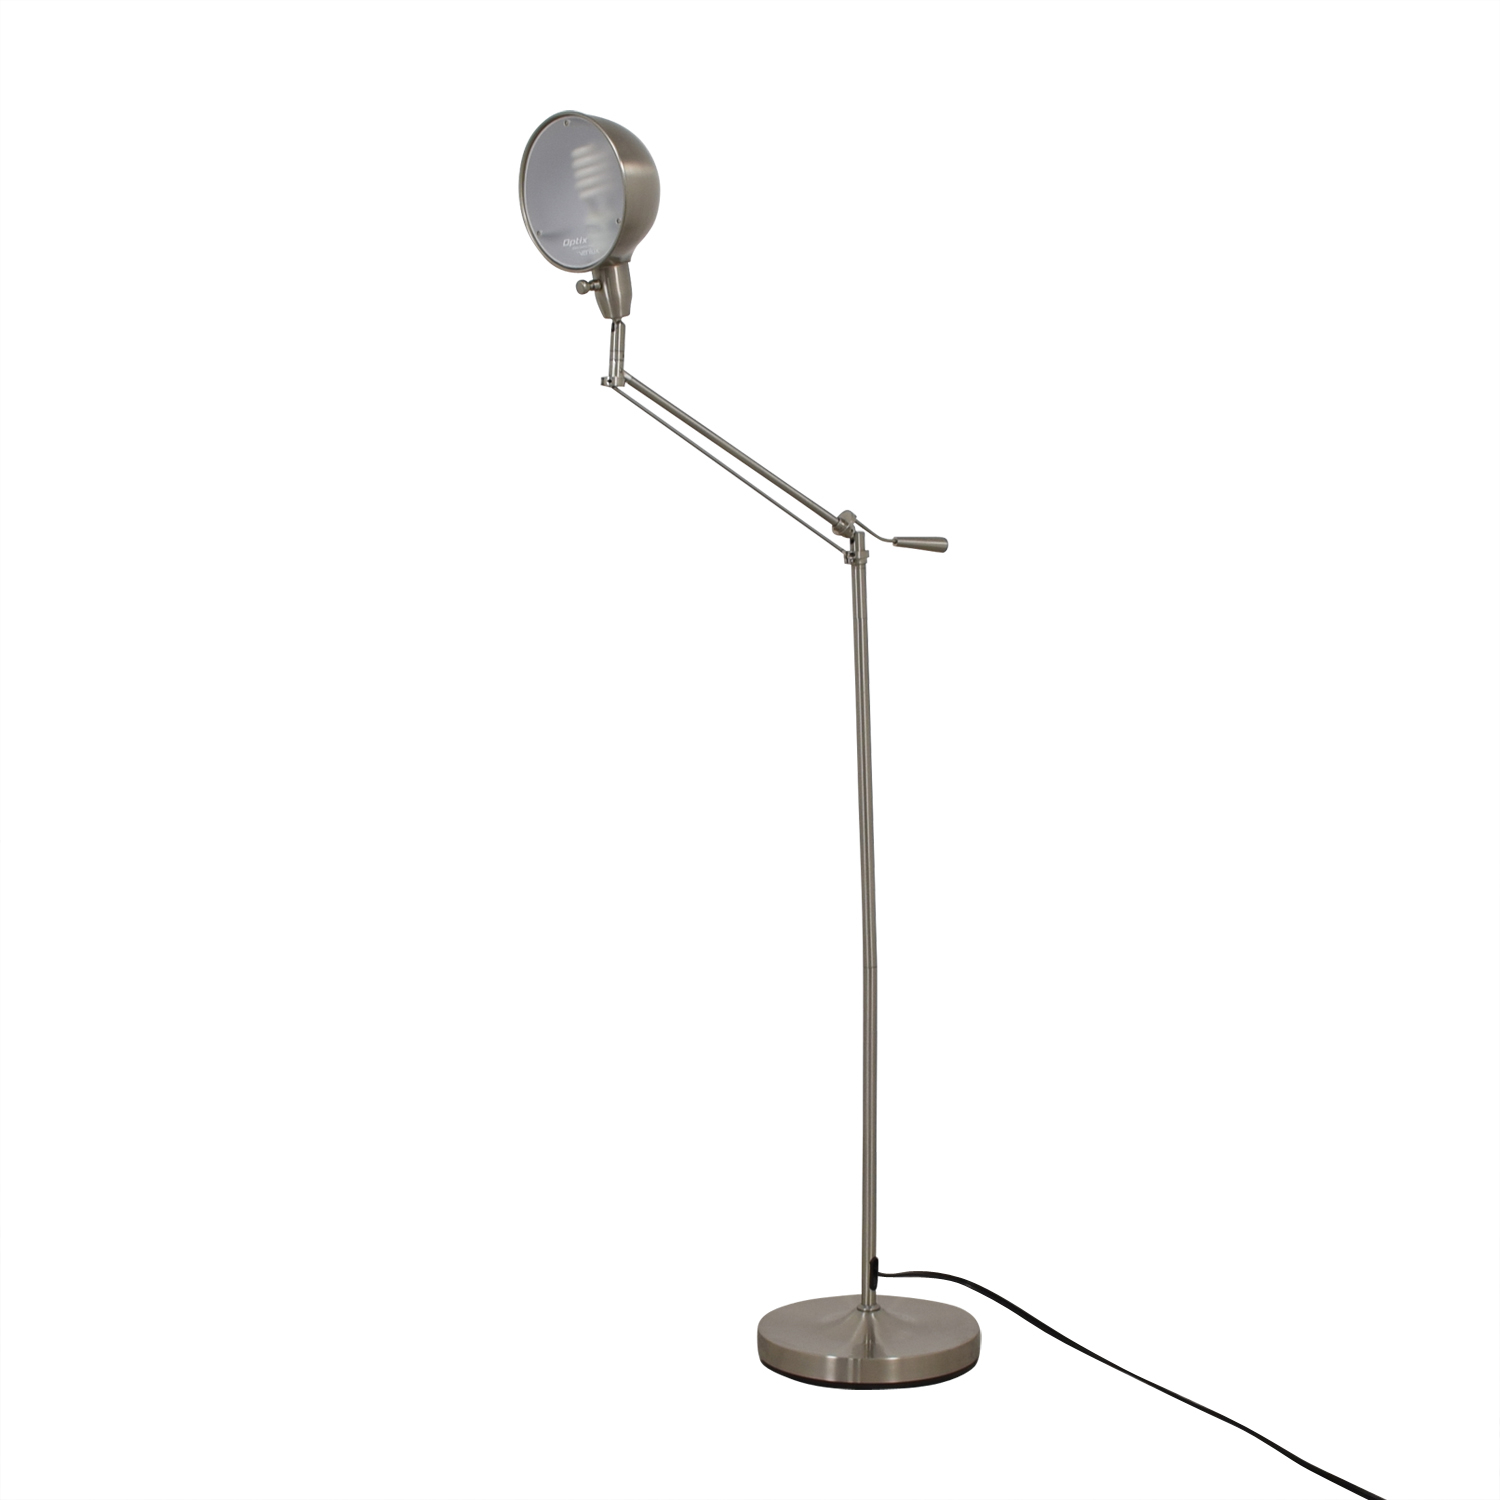 75 Off Verilux Brookfield Natural Spectrum Floor Lamp Decor with sizing 1500 X 1500